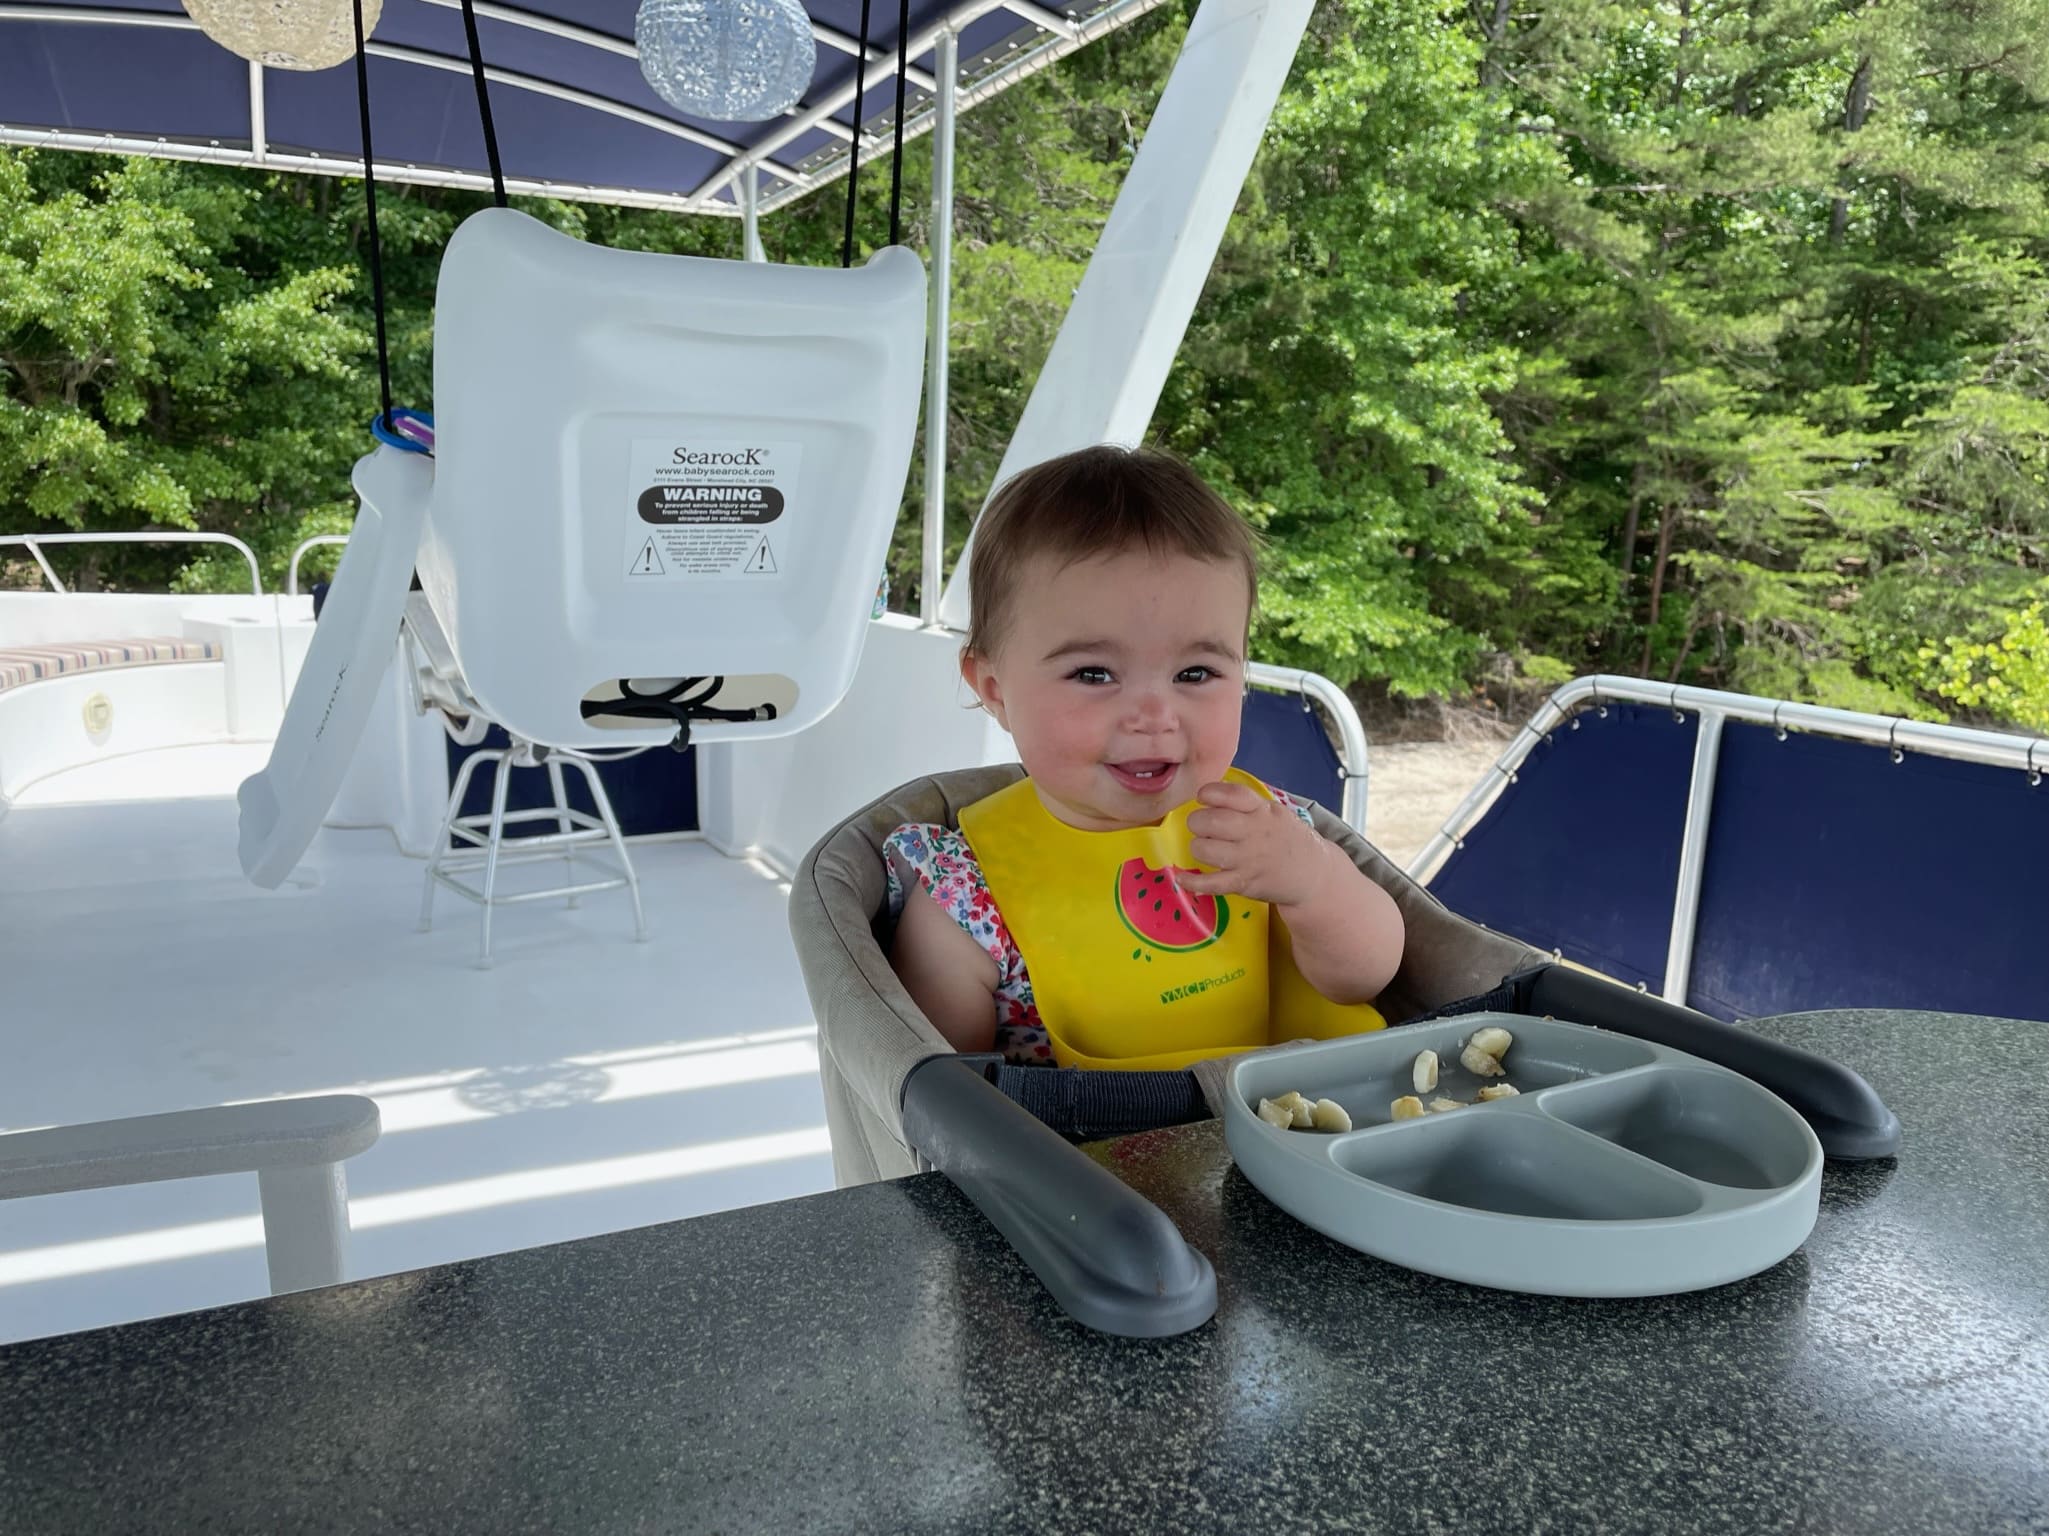 Clare Kitchens eating a snack on the deck of her houseboat